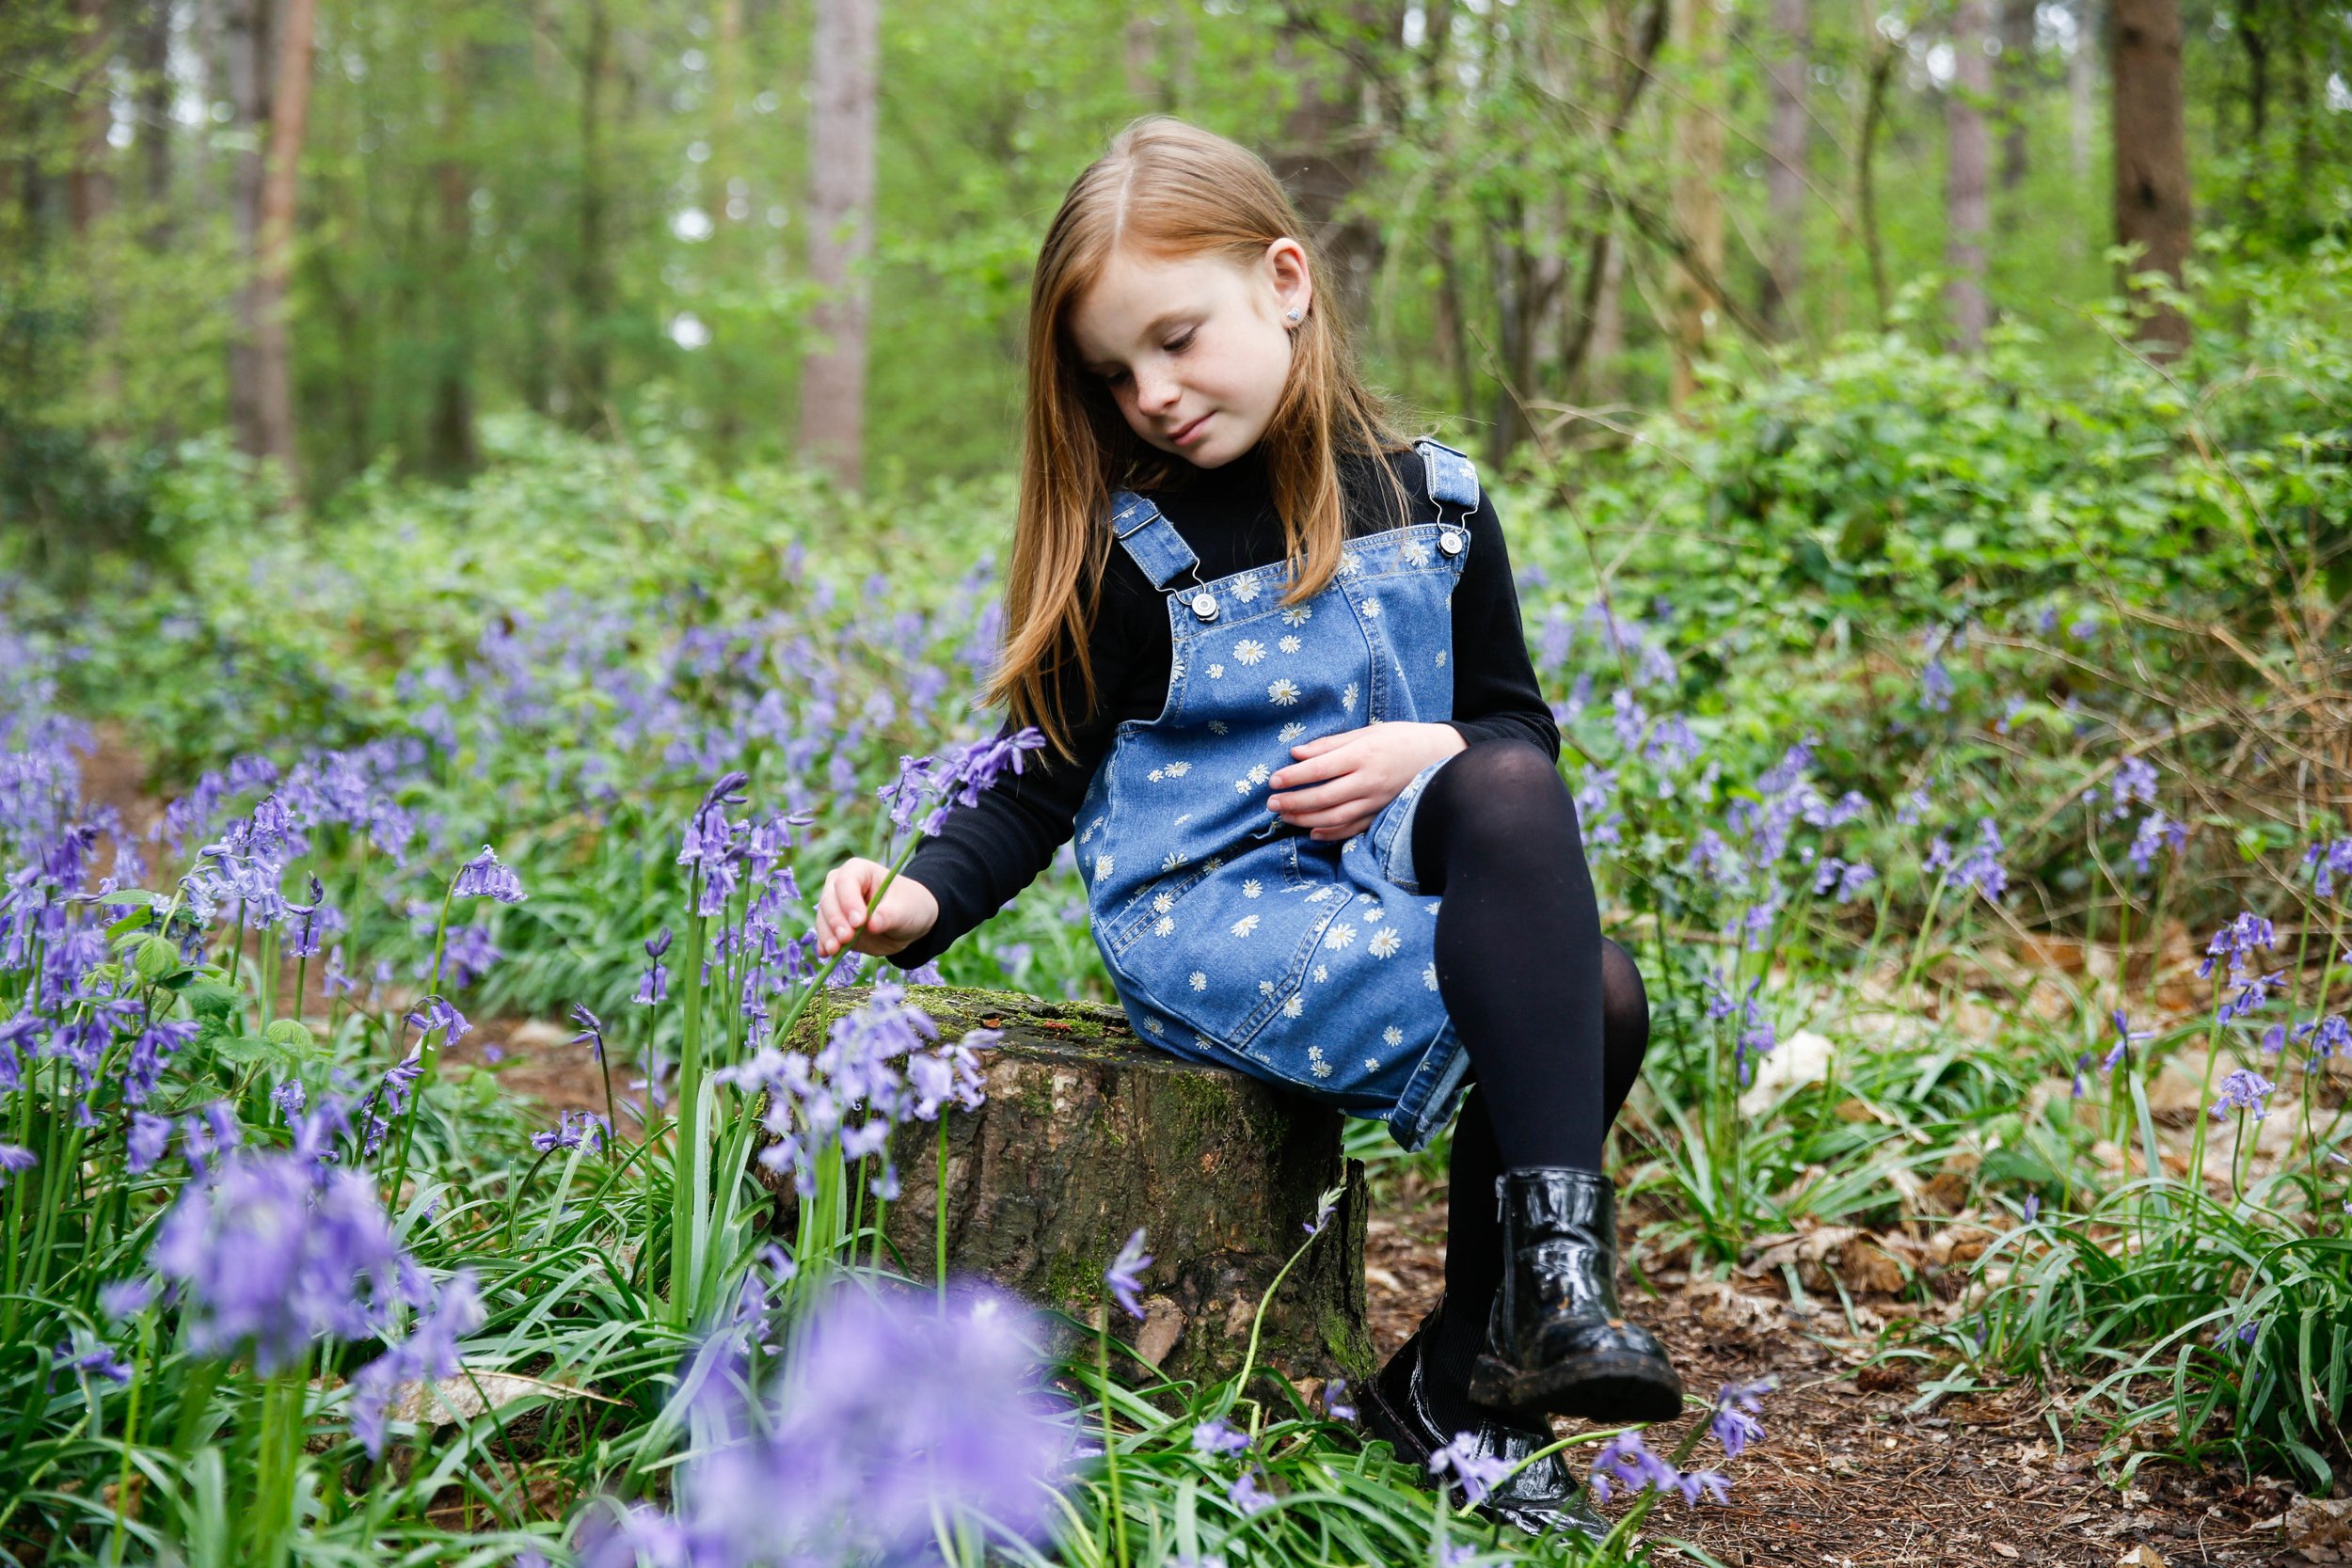 MUM AND DAUGHTER PHOTO SHOOT IN THE BLUEBELLS | BERKSHIRE PORTRAIT SHOOTS09 choice .JPG